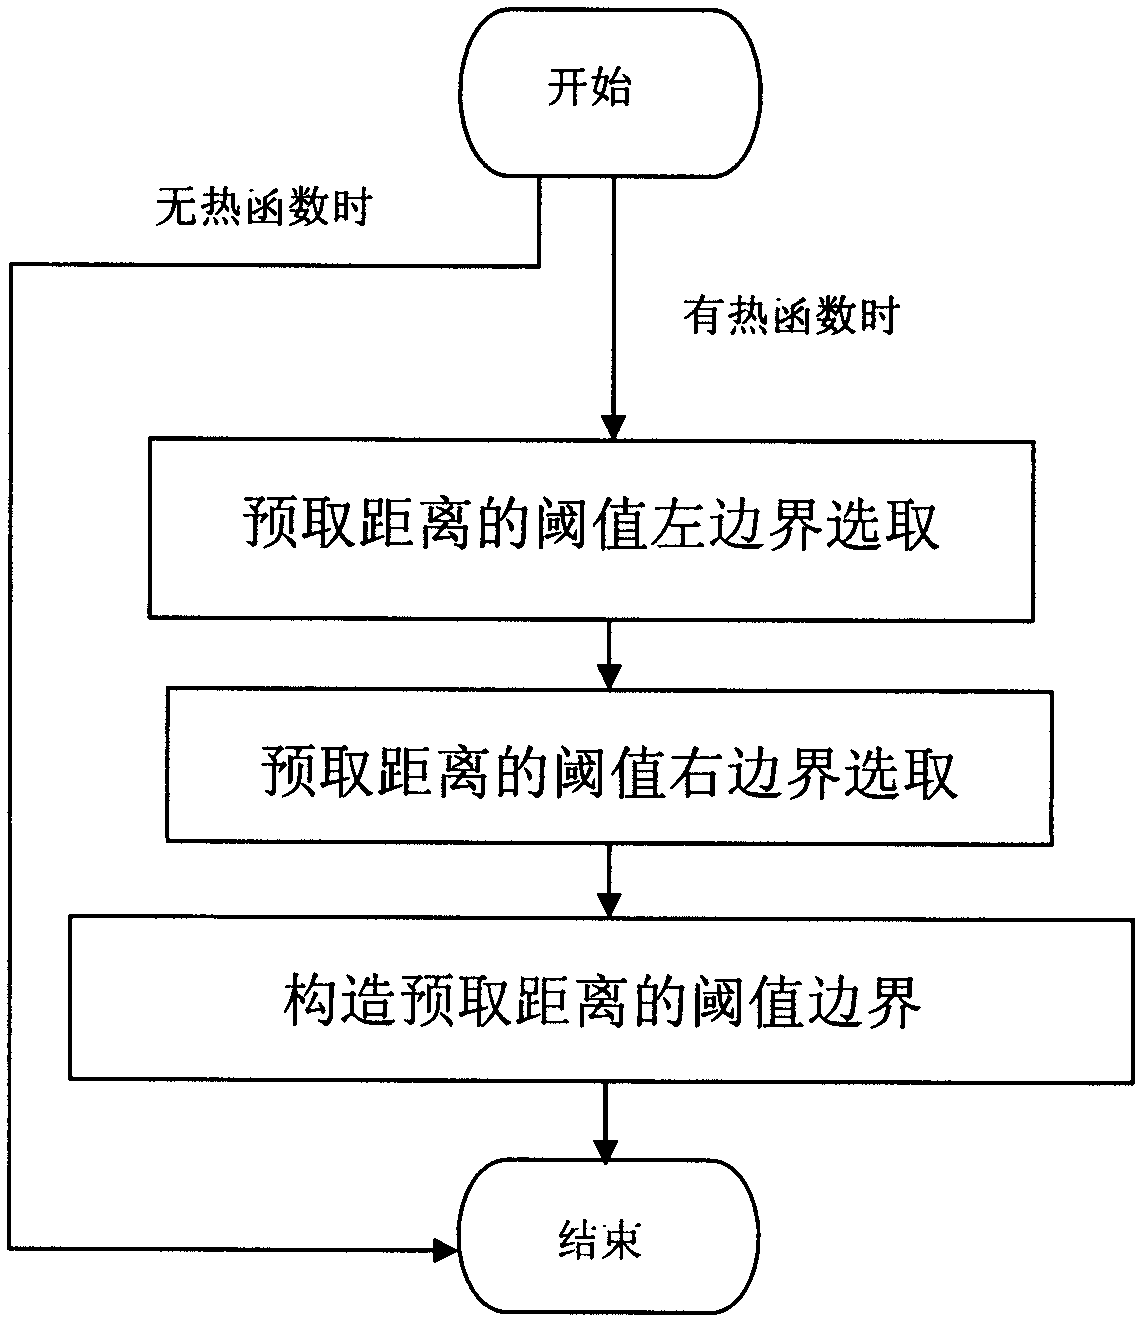 Threshold boundary selecting method for supporting helper thread pre-fetching distance parameters